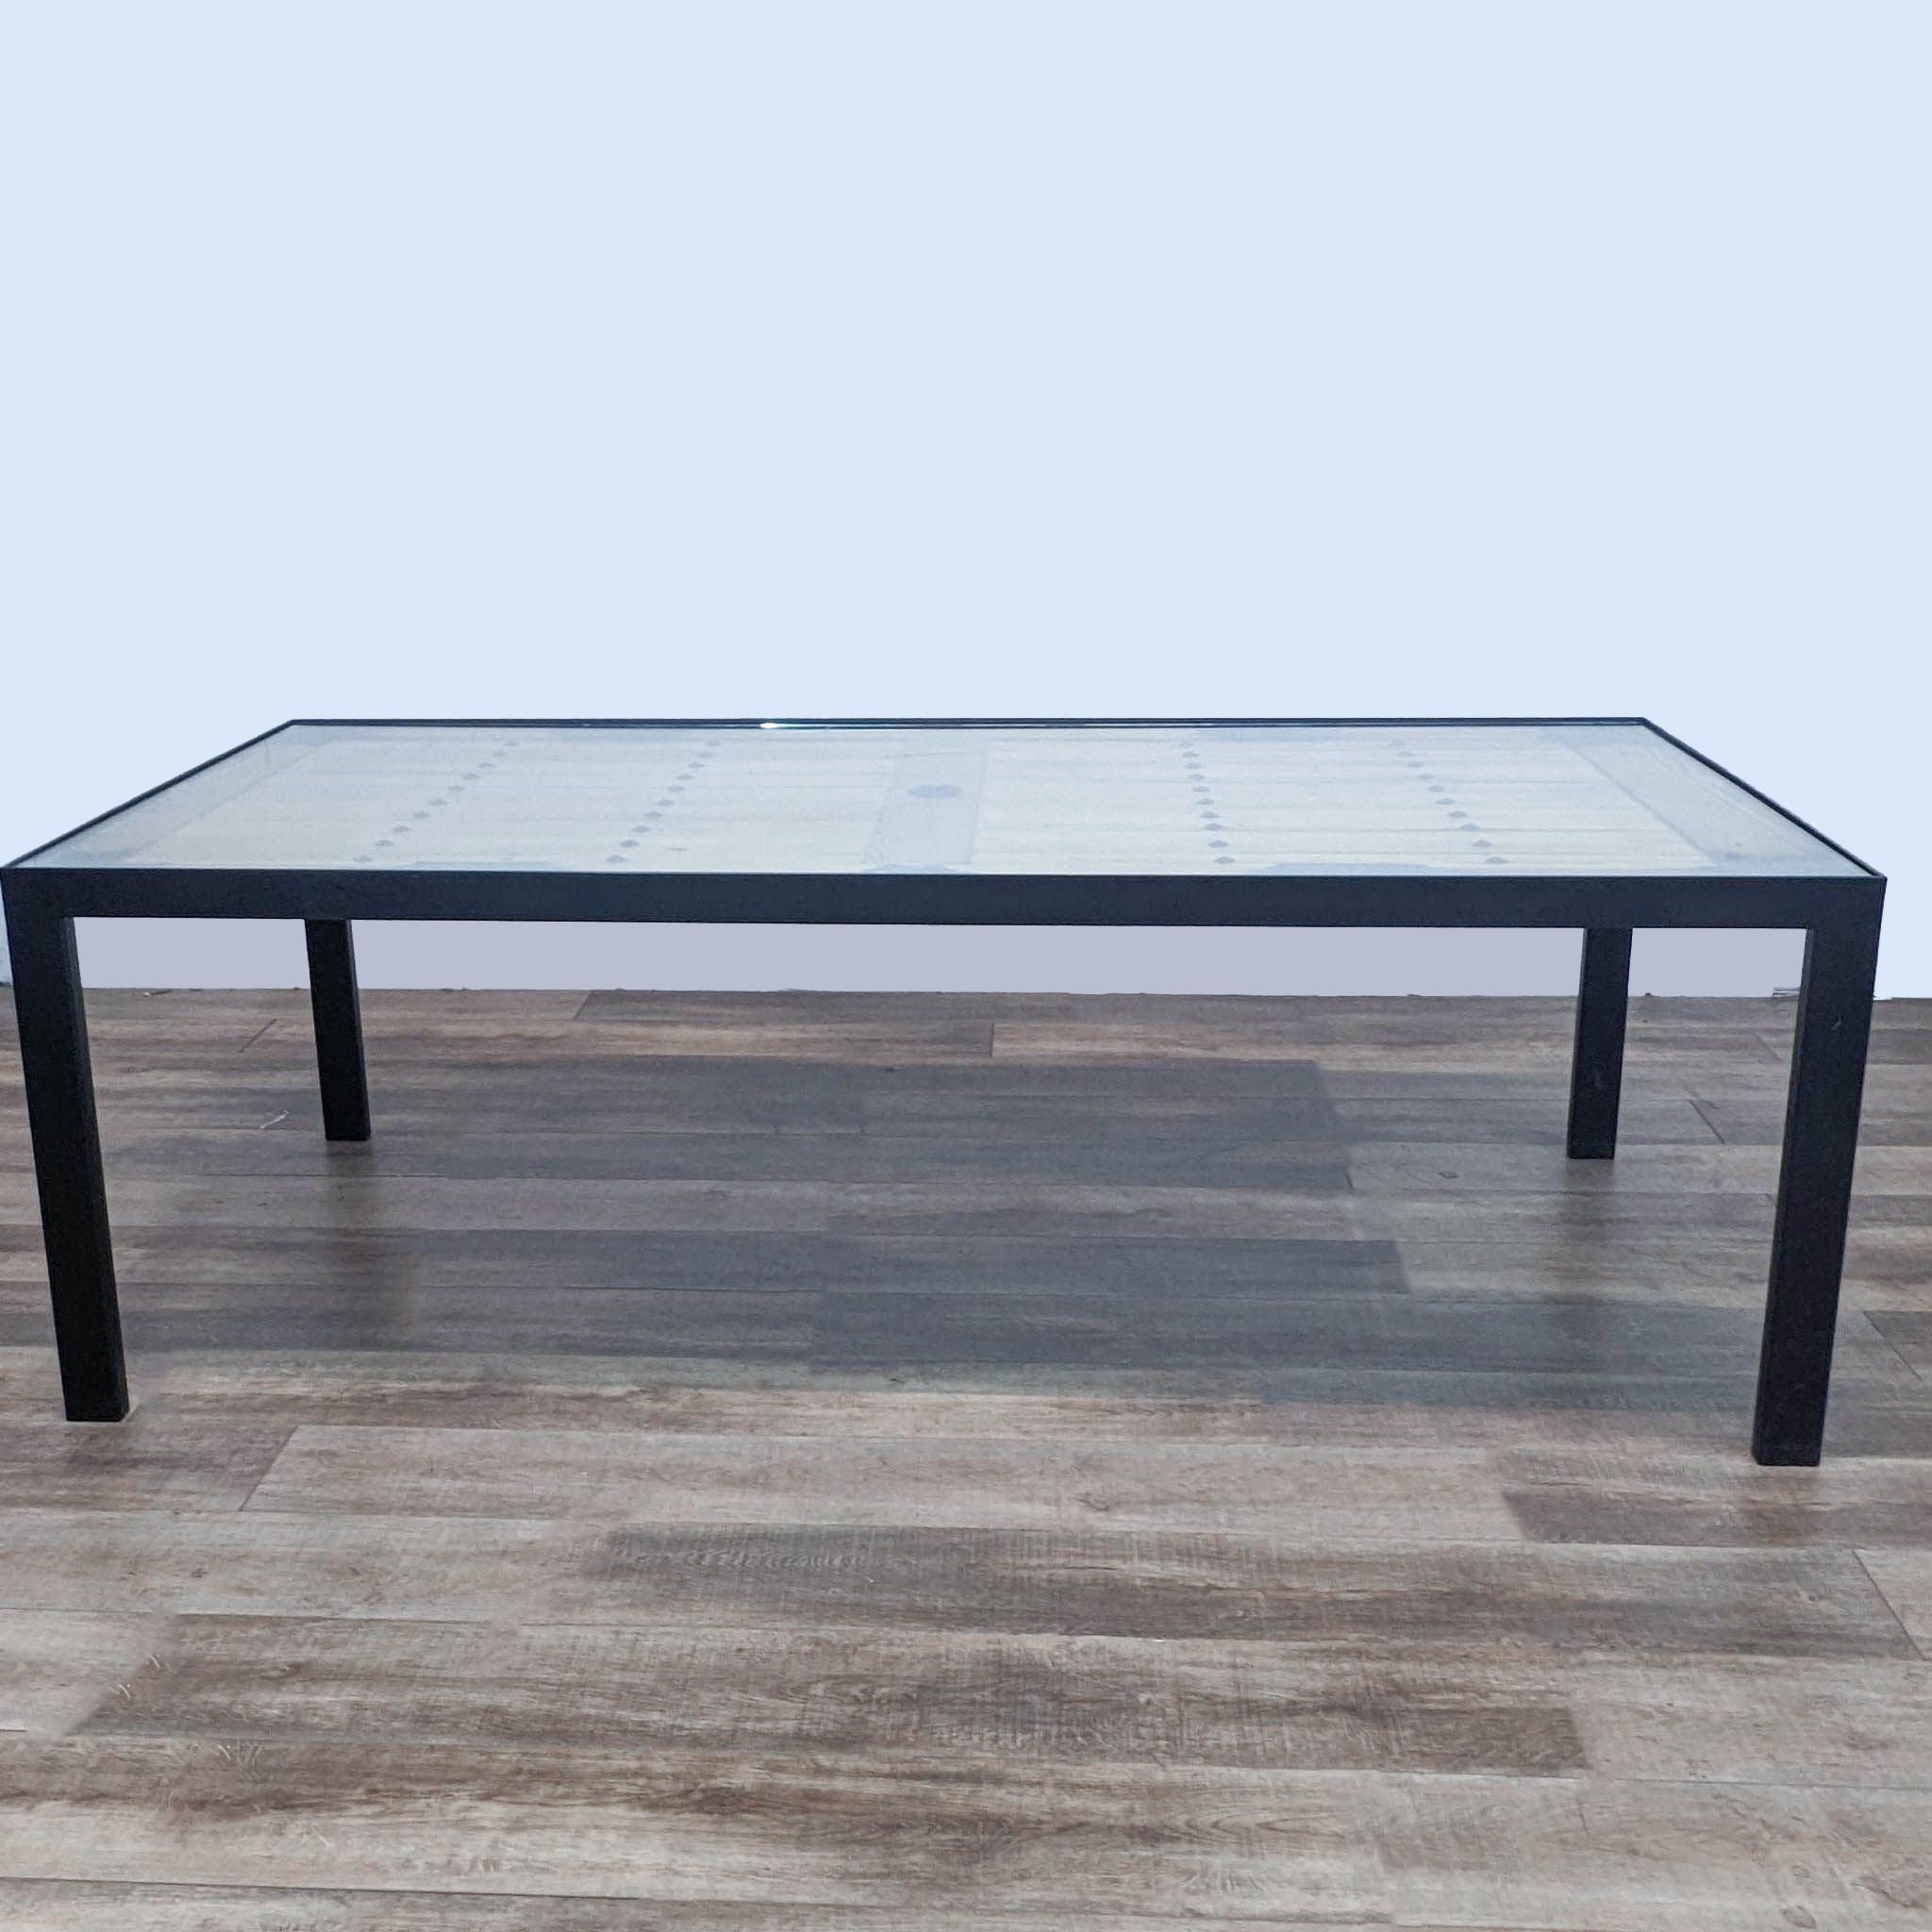 Alt text 2: Modern glass-top dining table from Tansu Design featuring a repurposed Japanese warehouse door base.